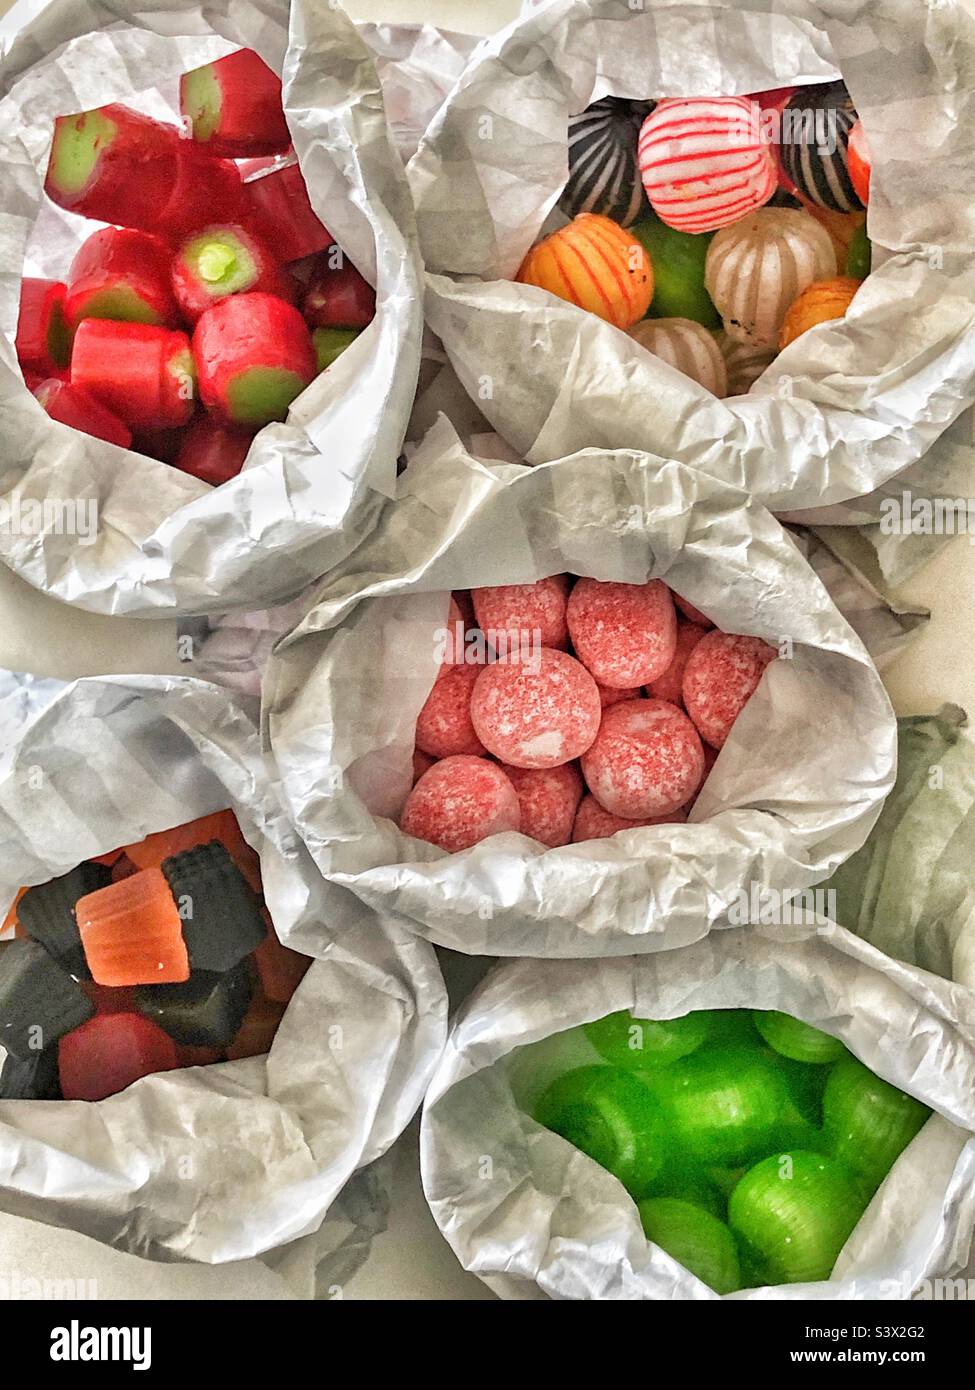 Traditional old fashioned sweets in paper bags rhubarb rock, soor plooms, midget gems, cinnamon balls, humbugs striped balls Stock Photo